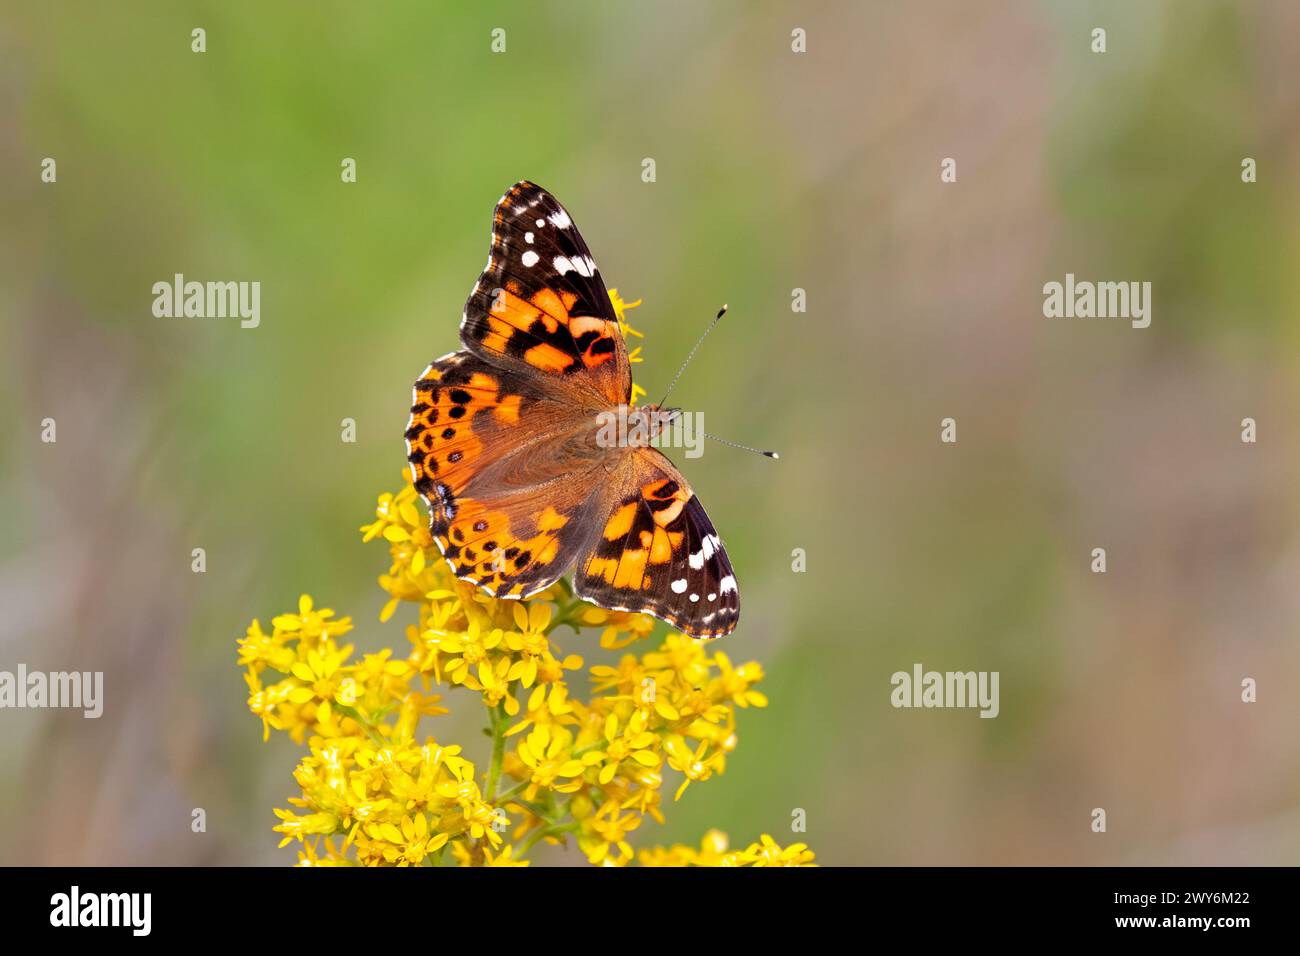 A Painted Lady Butterfly Pollinates a Goldenrod Flower Stock Photo